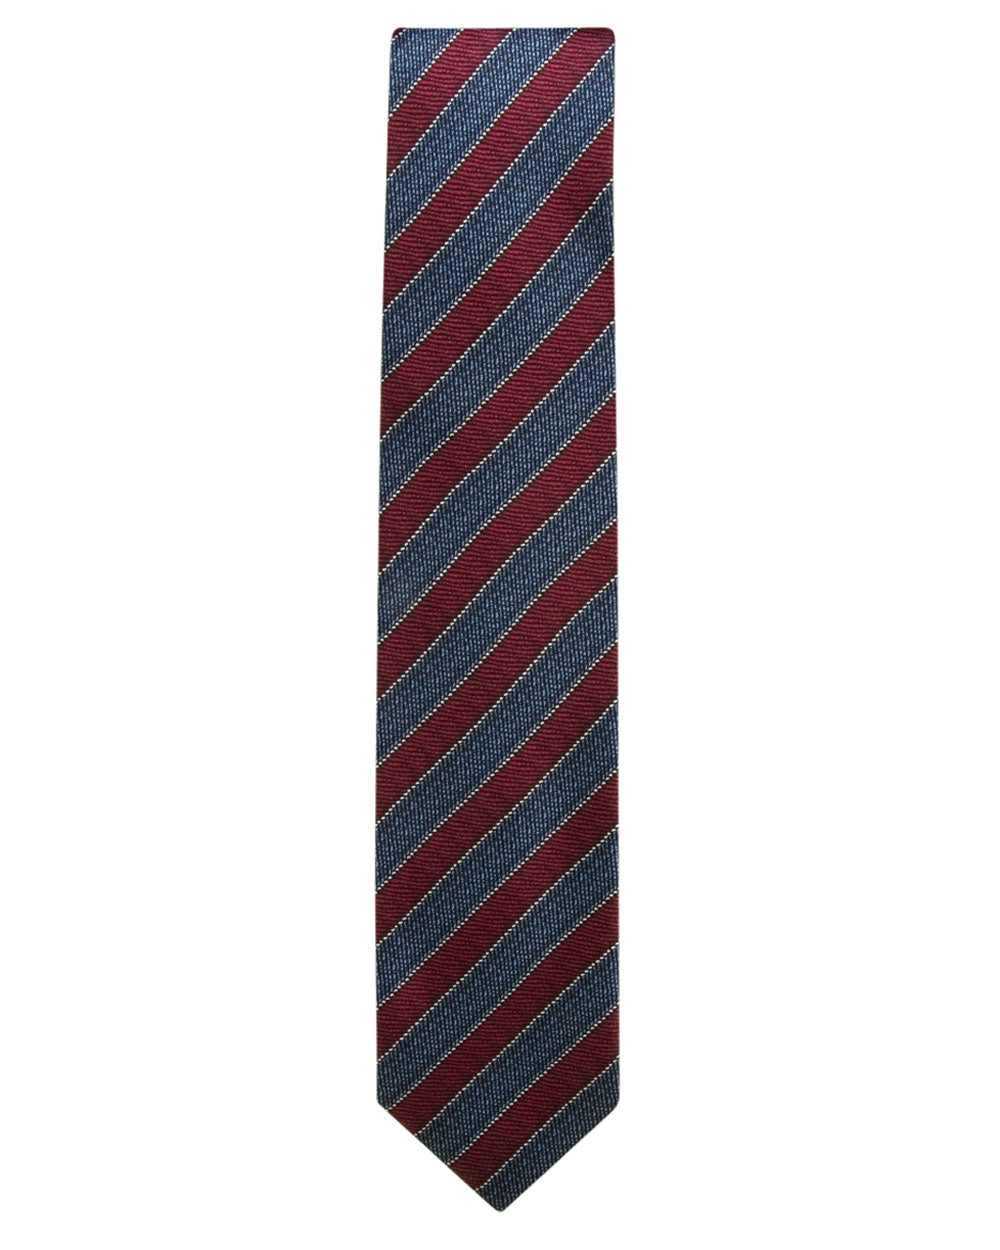 Red and Navy Striped Tie